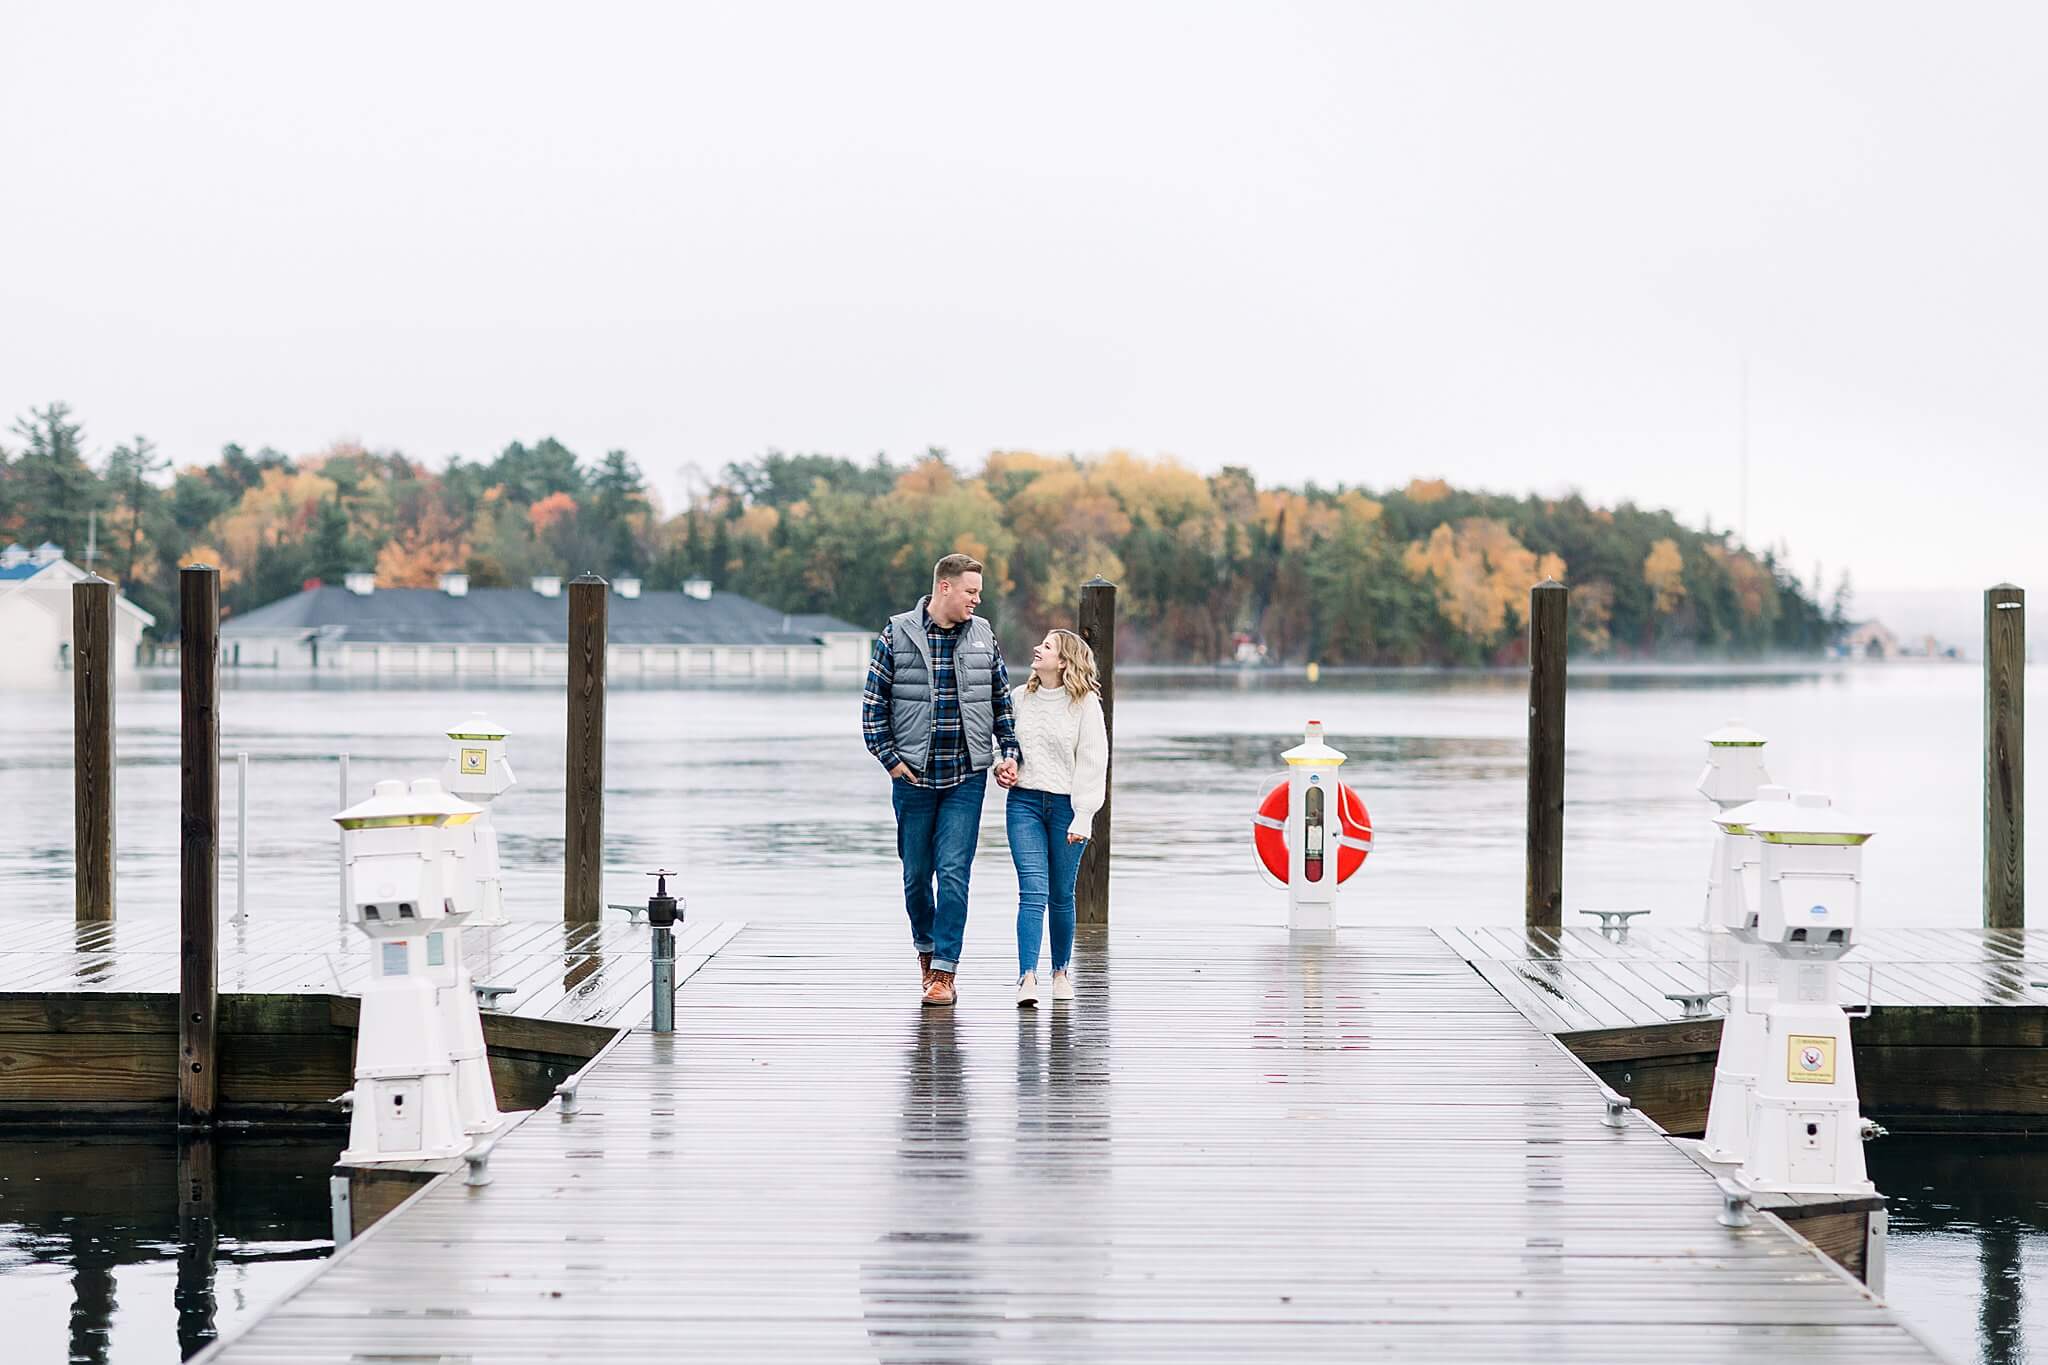 Bride and groom walk together on rainy dock during rainy fall engagement session in Charlevoix, Michigan.